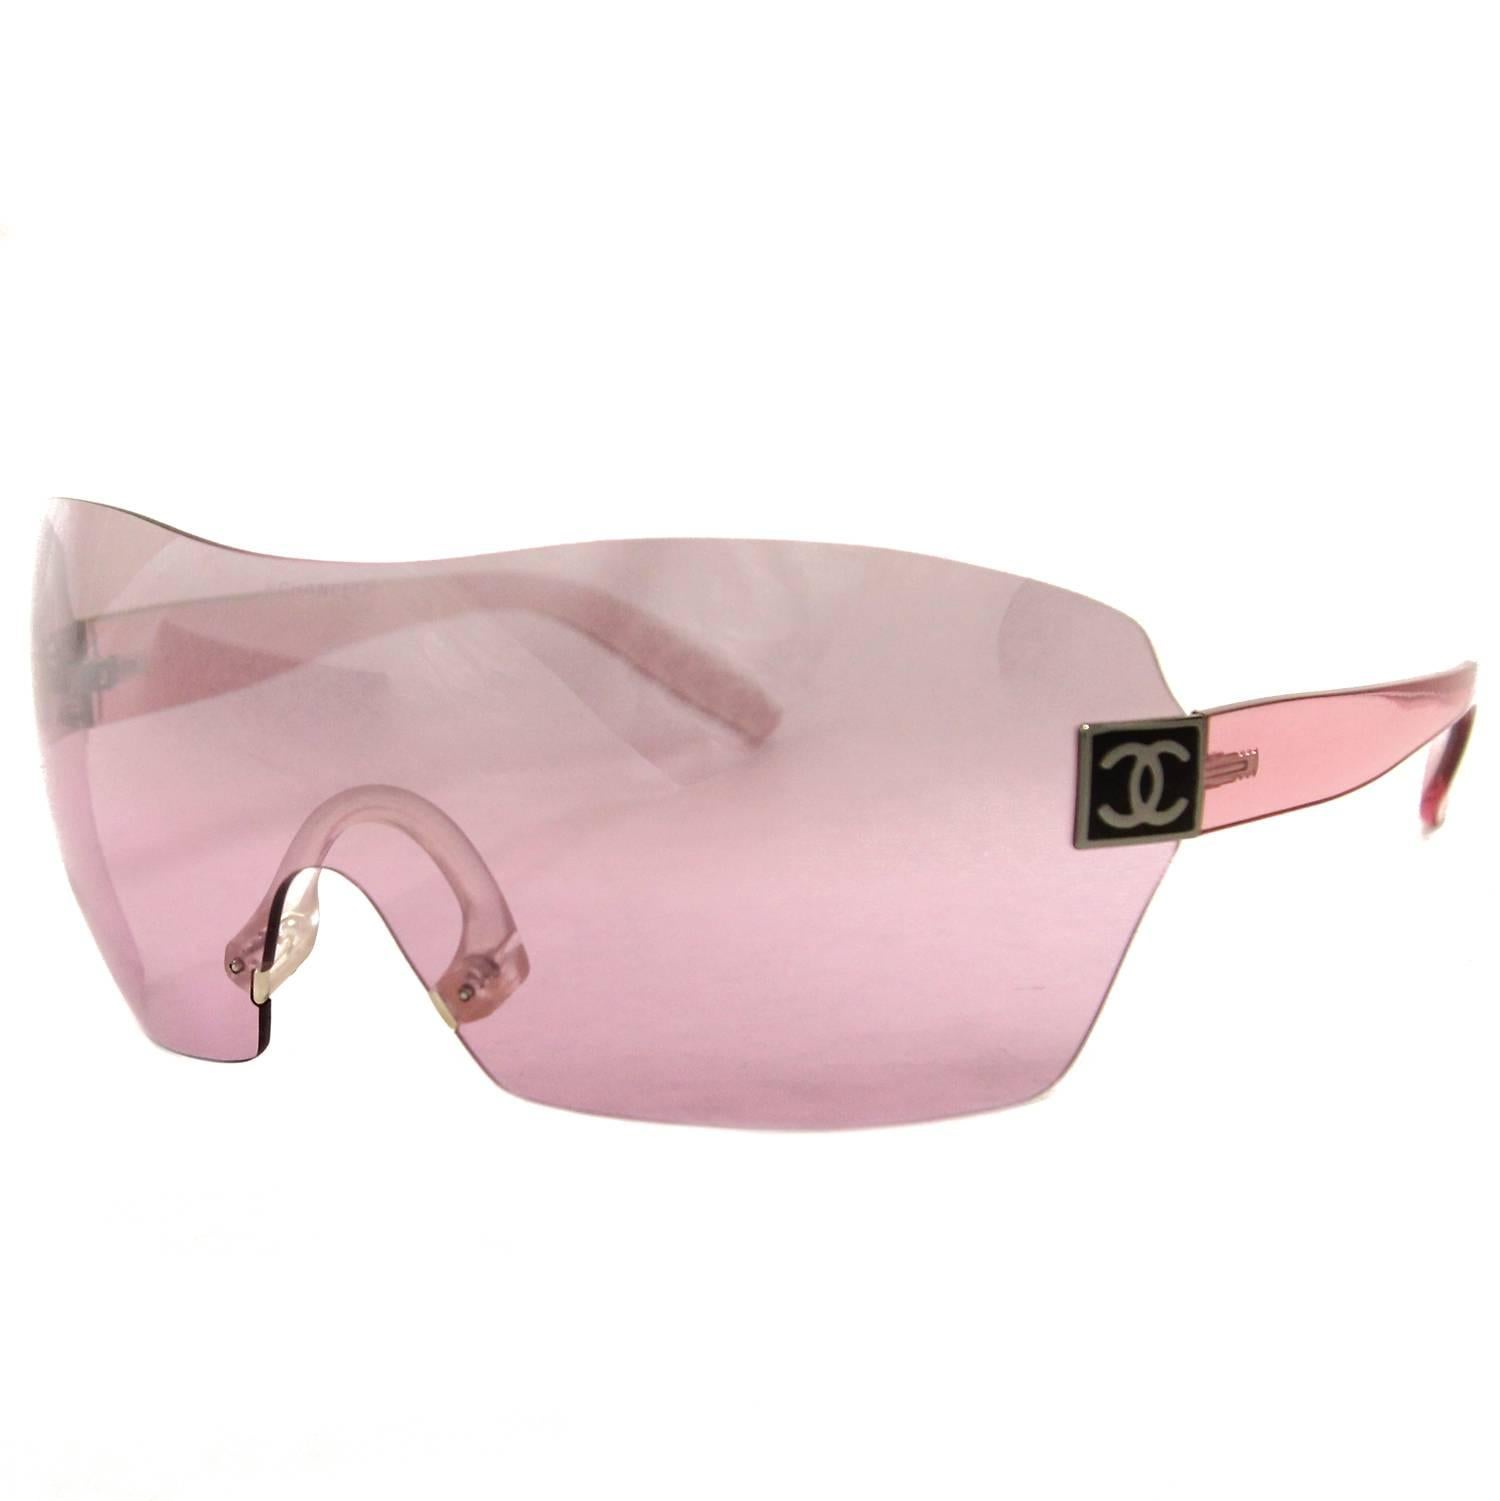 Energetic Chanel transparent pink mask shape sunglasses with lightly mirrored lenses. The item comes with its original guarantee certificate. Excellent conditions. 
Please note this item cannot be shipped to the US. 

Measurements: Width: 14 cm